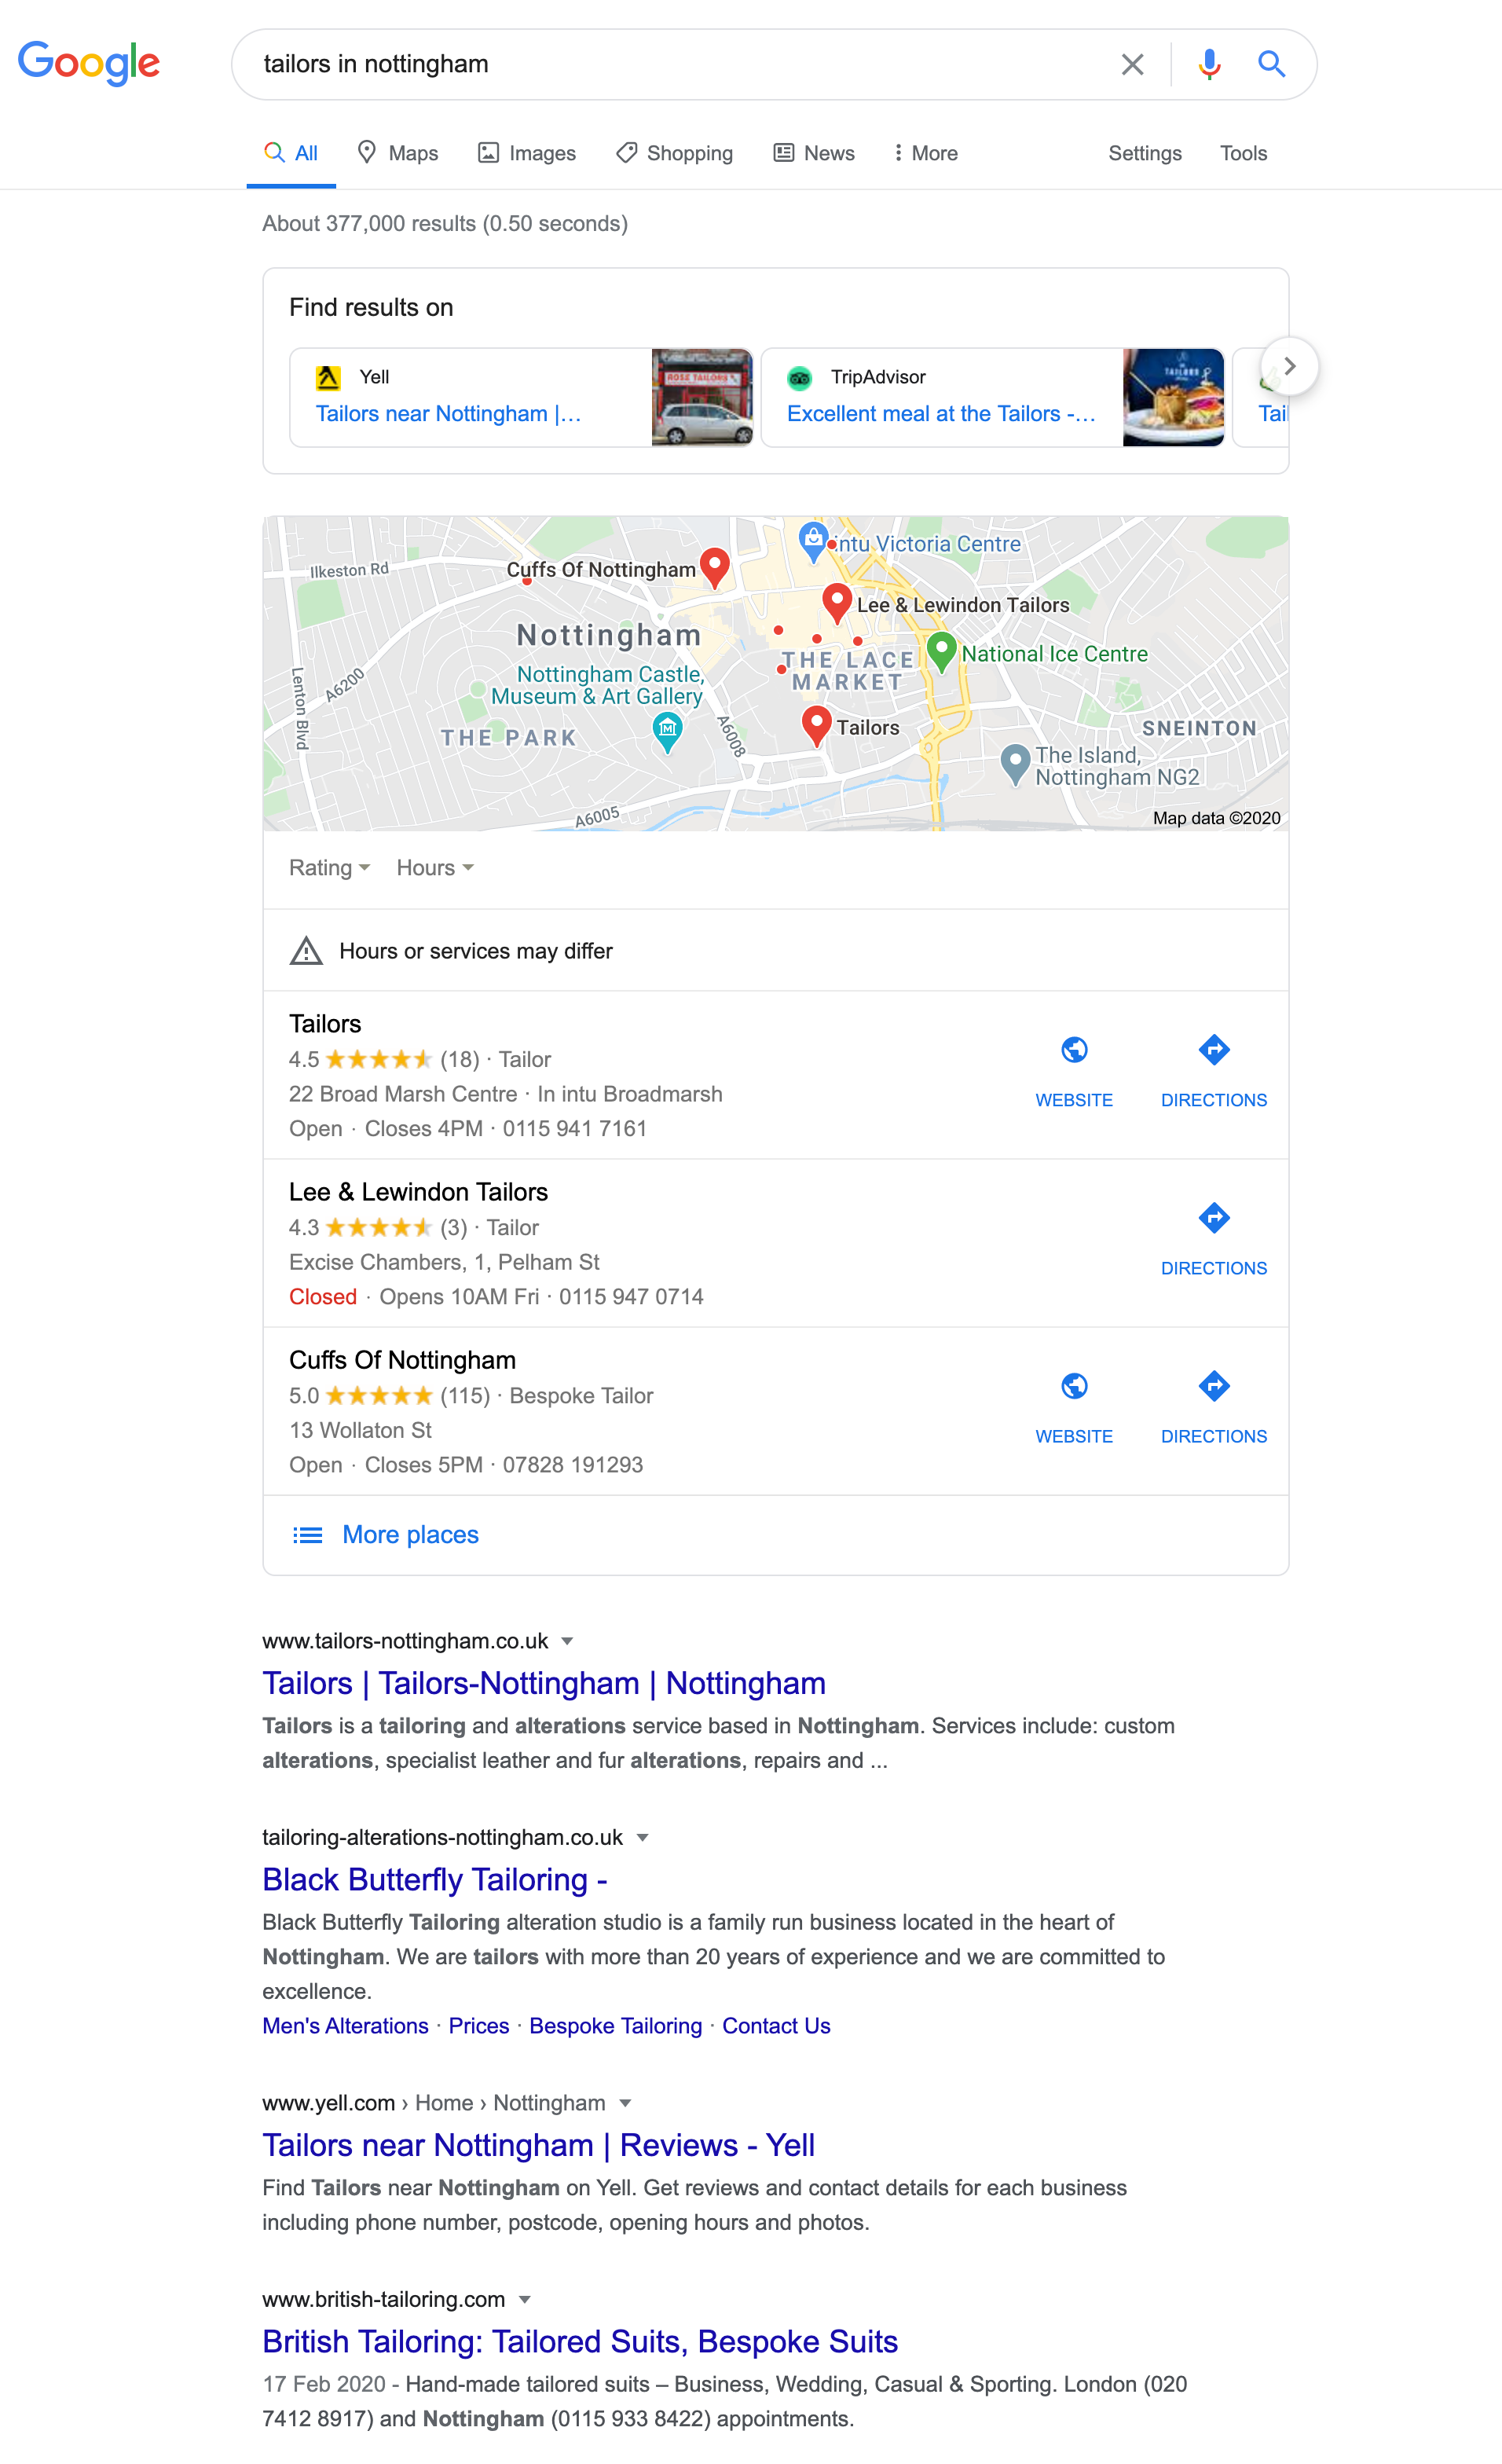 Tailors in Nottingham Google Search